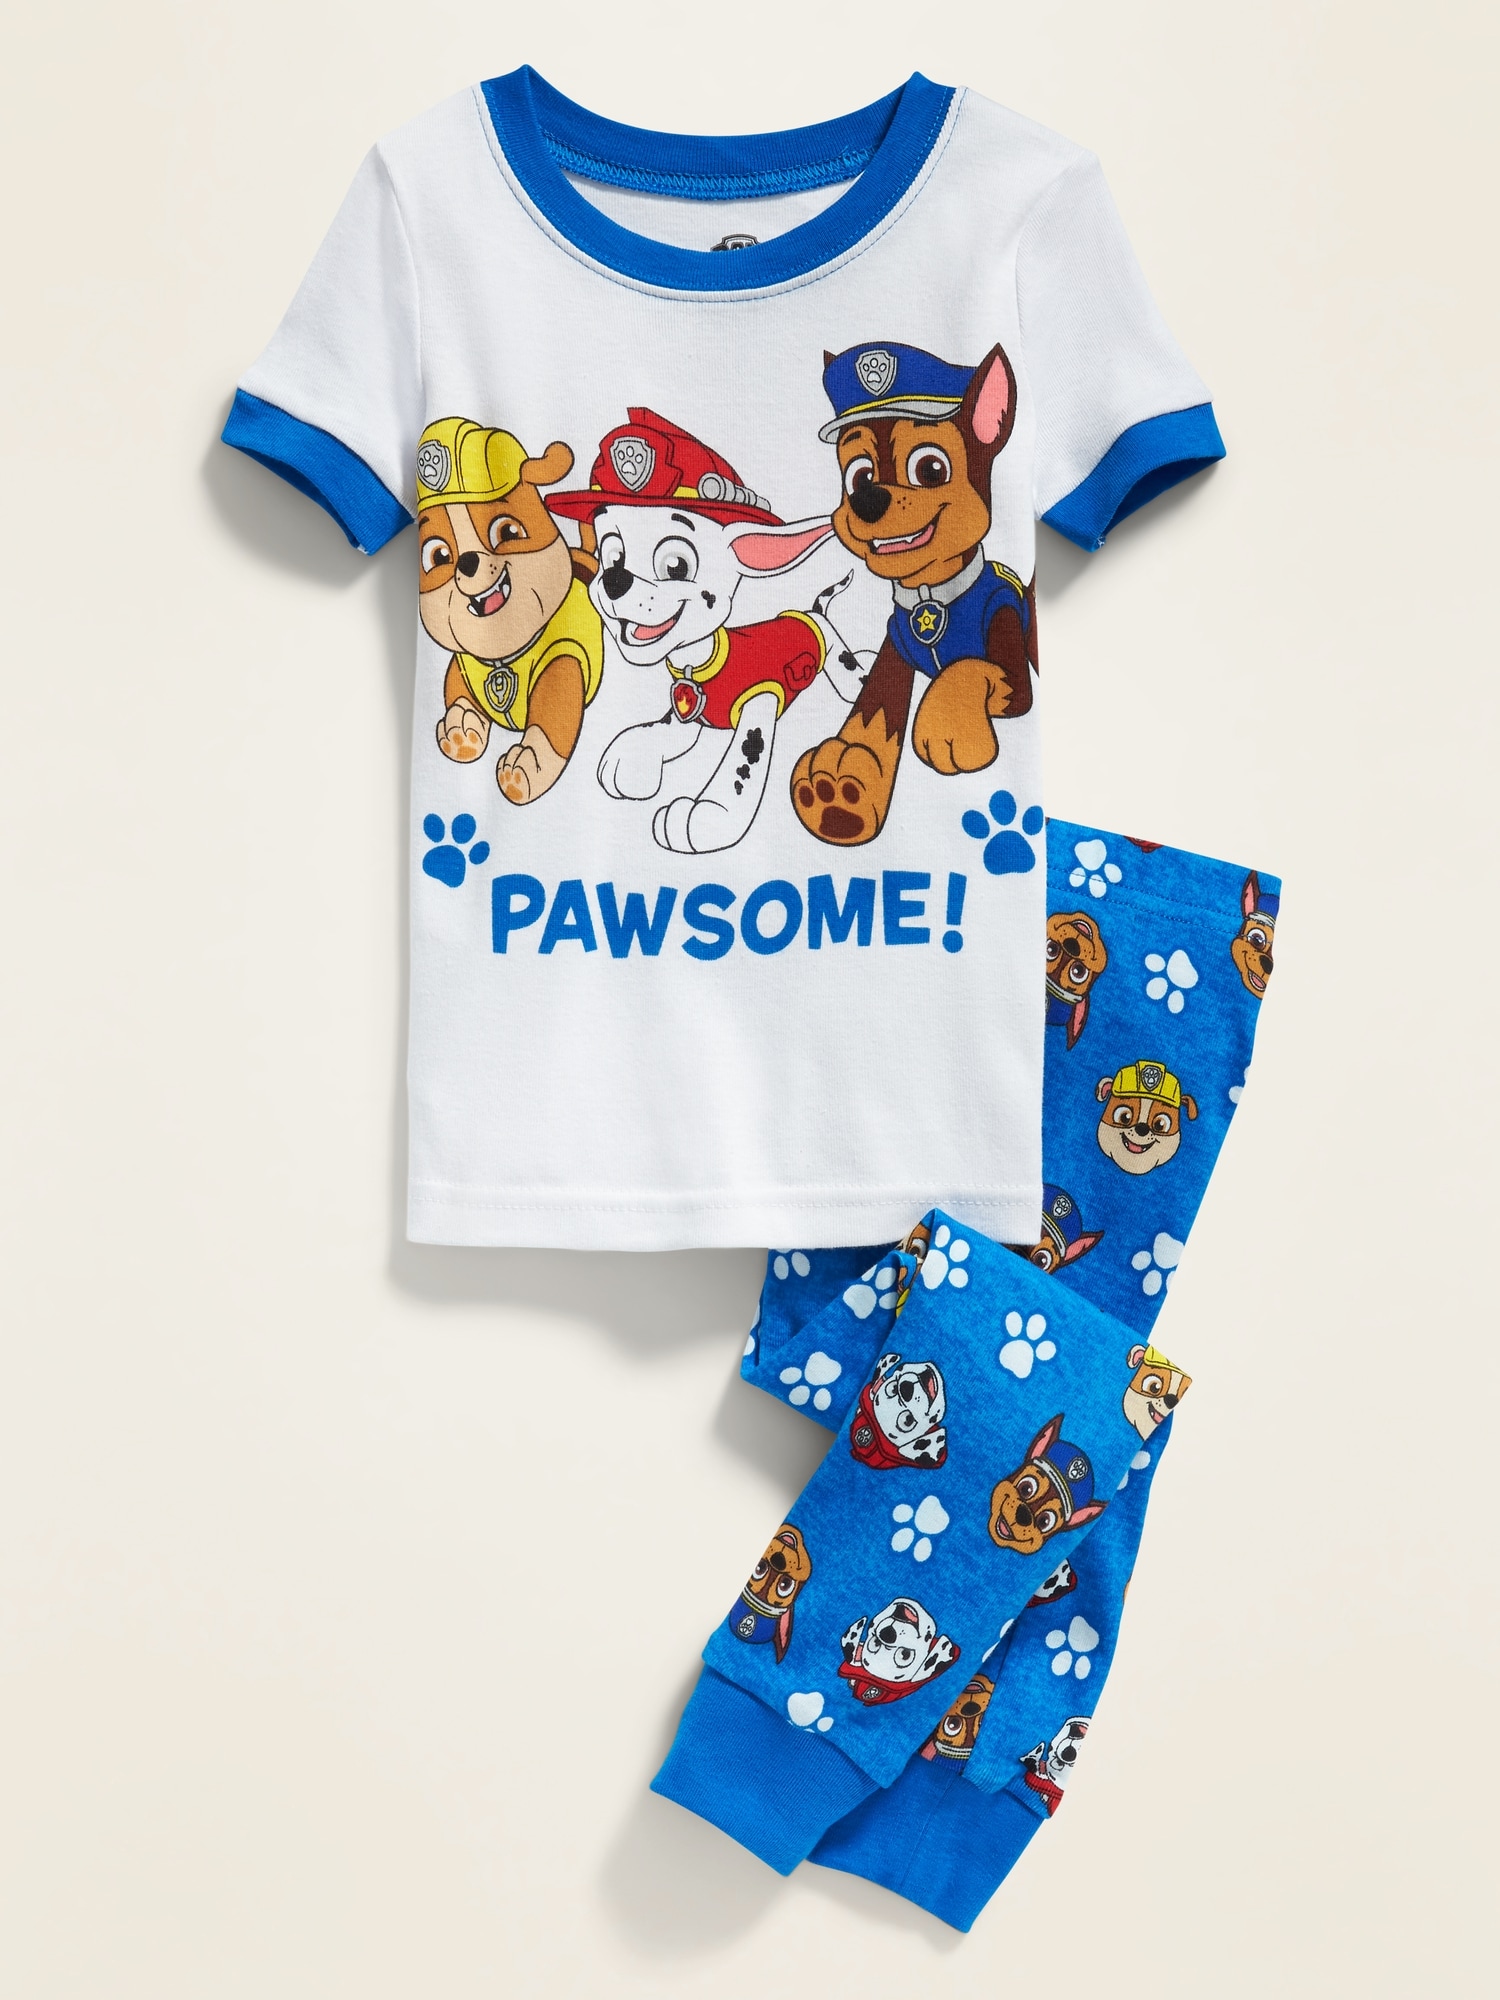 NWT TODDLER GIRL PAW PATROL "SQUAD GOALS" SHIRT SIZE 3T 